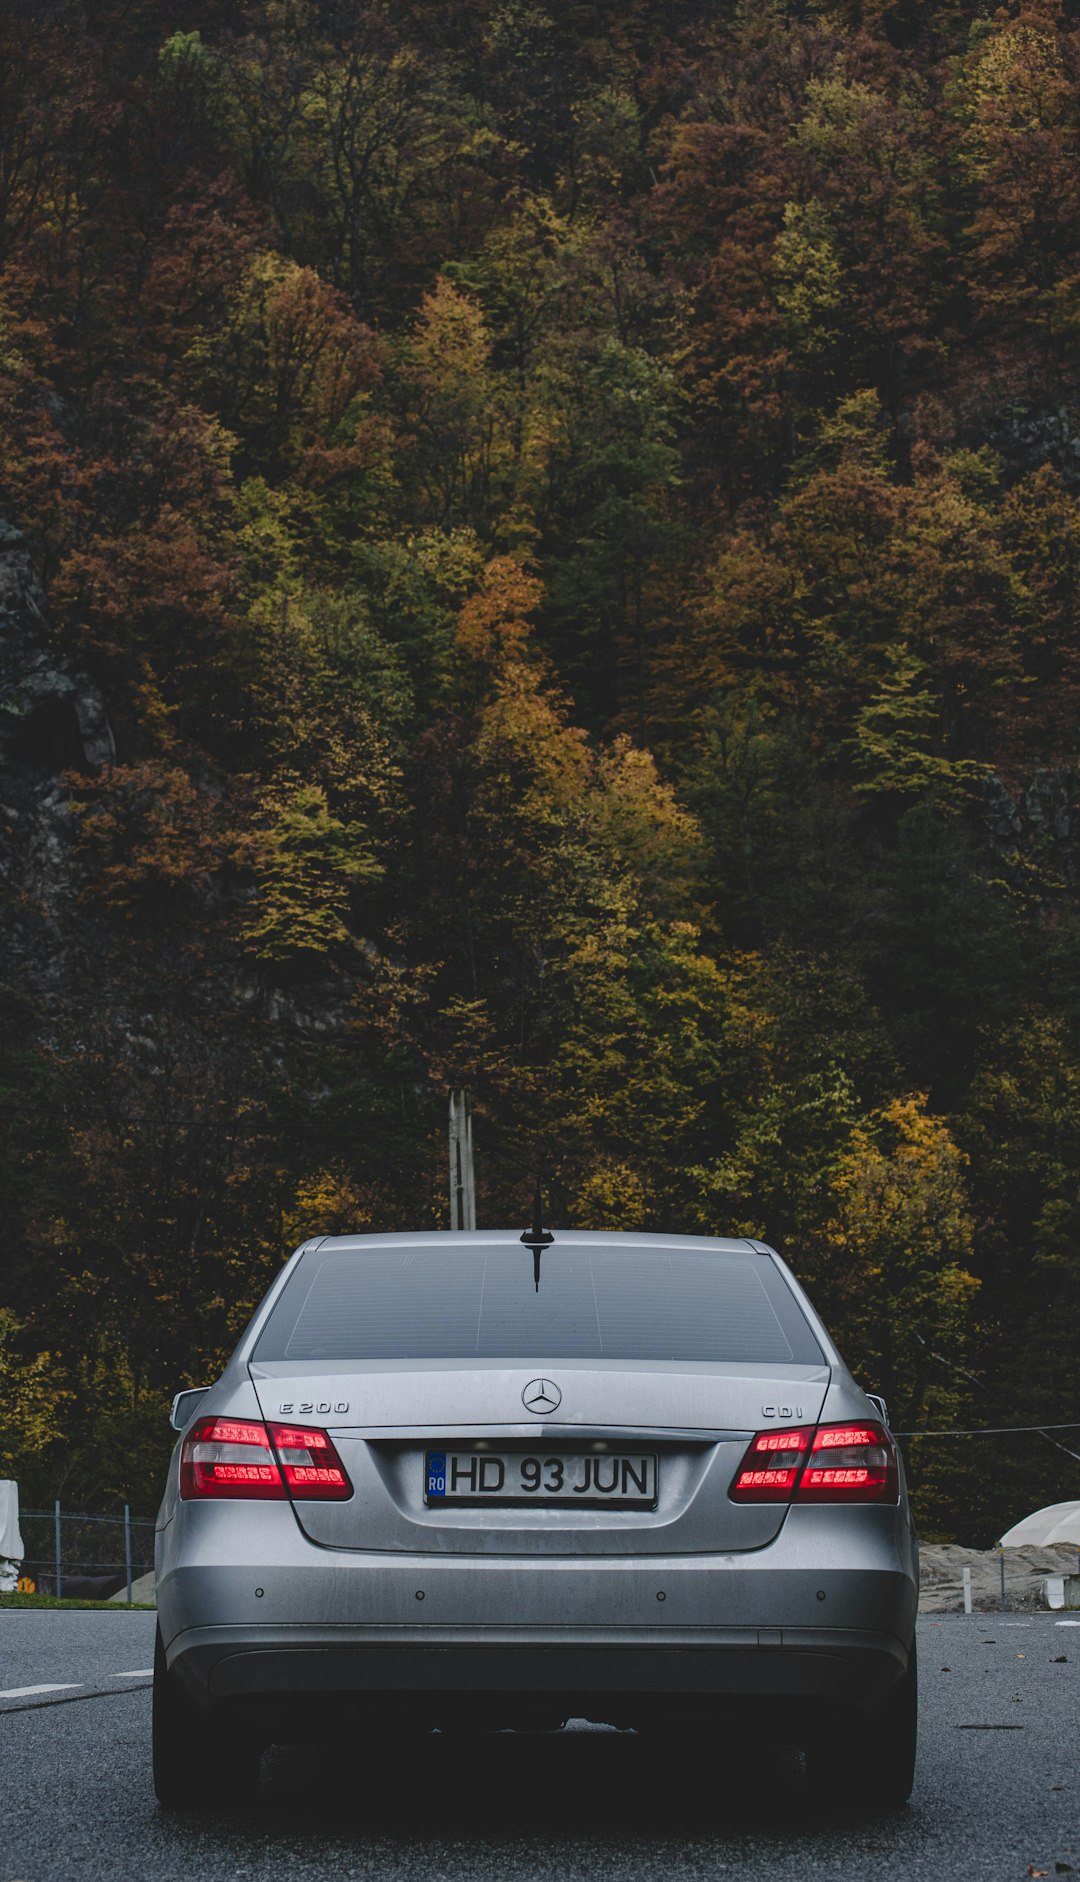 black mercedes benz car on road surrounded by green trees during daytime